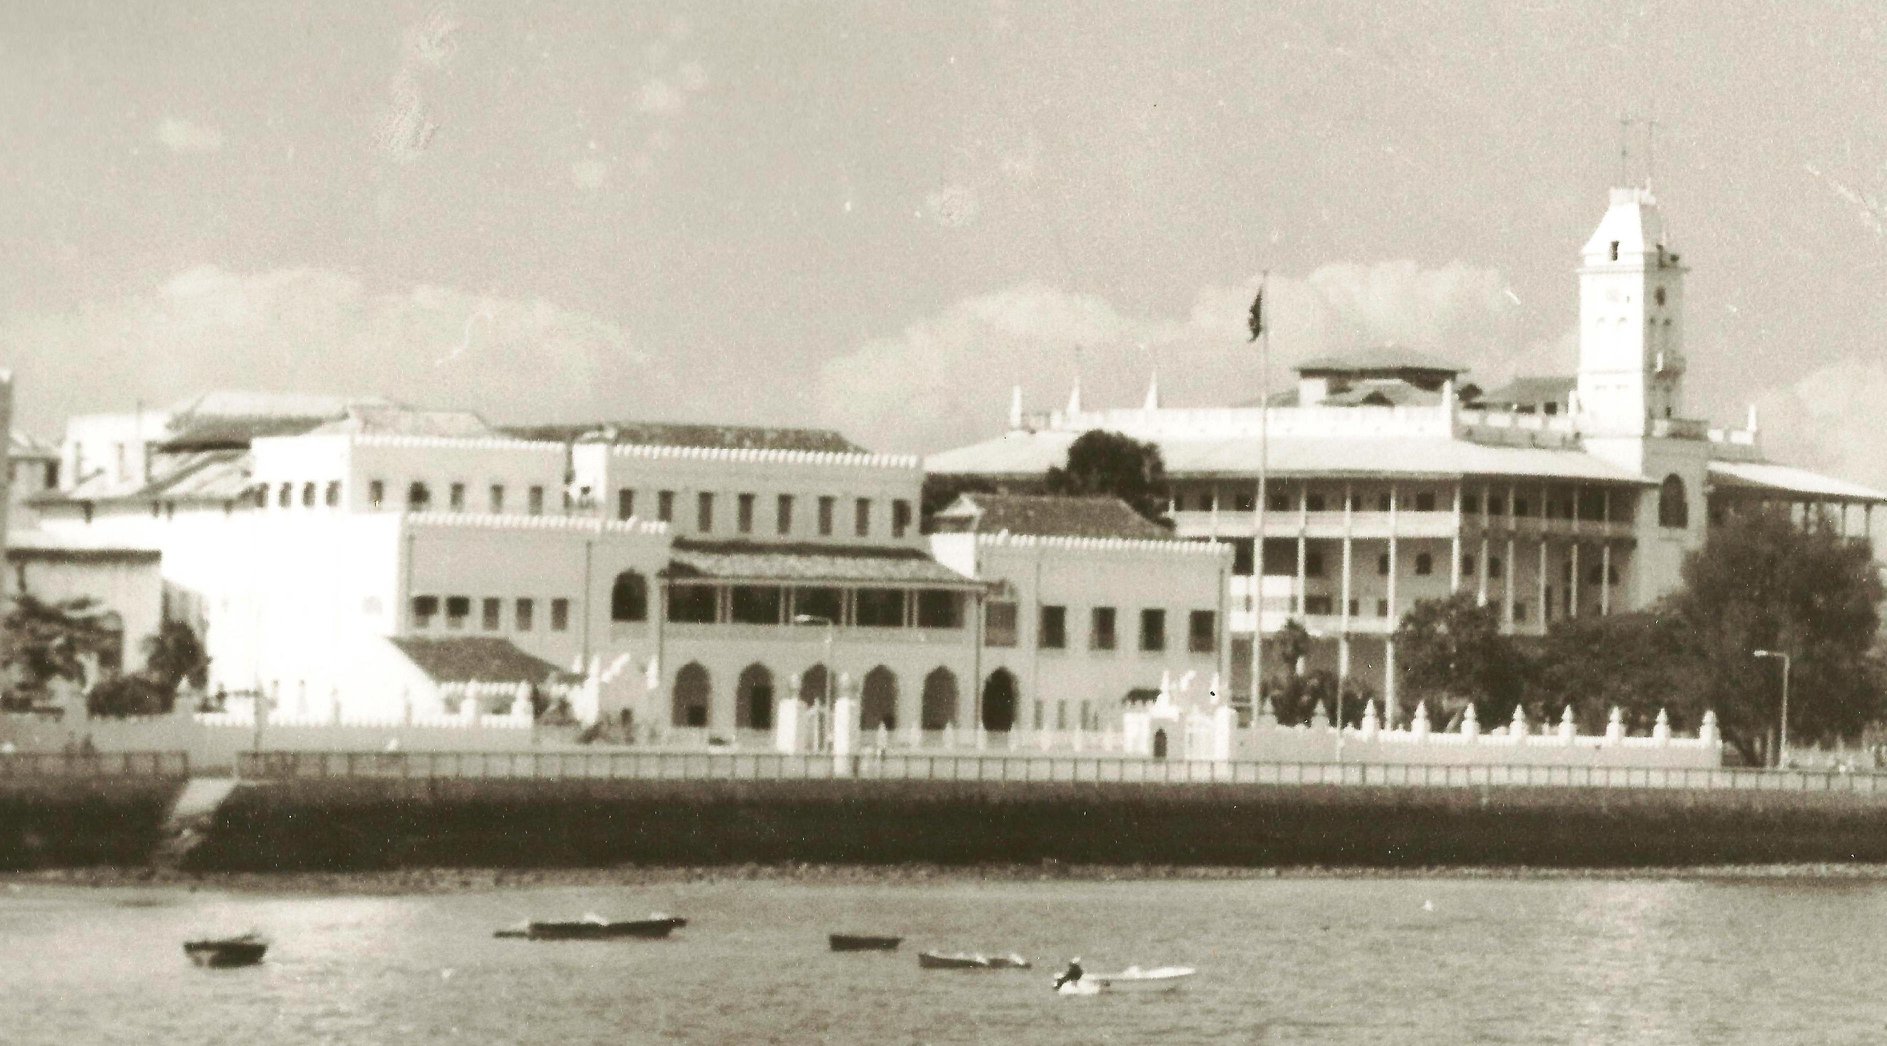 Picture 1. A picture of the Palace compound (the 3 buildings) taken around 1950s.